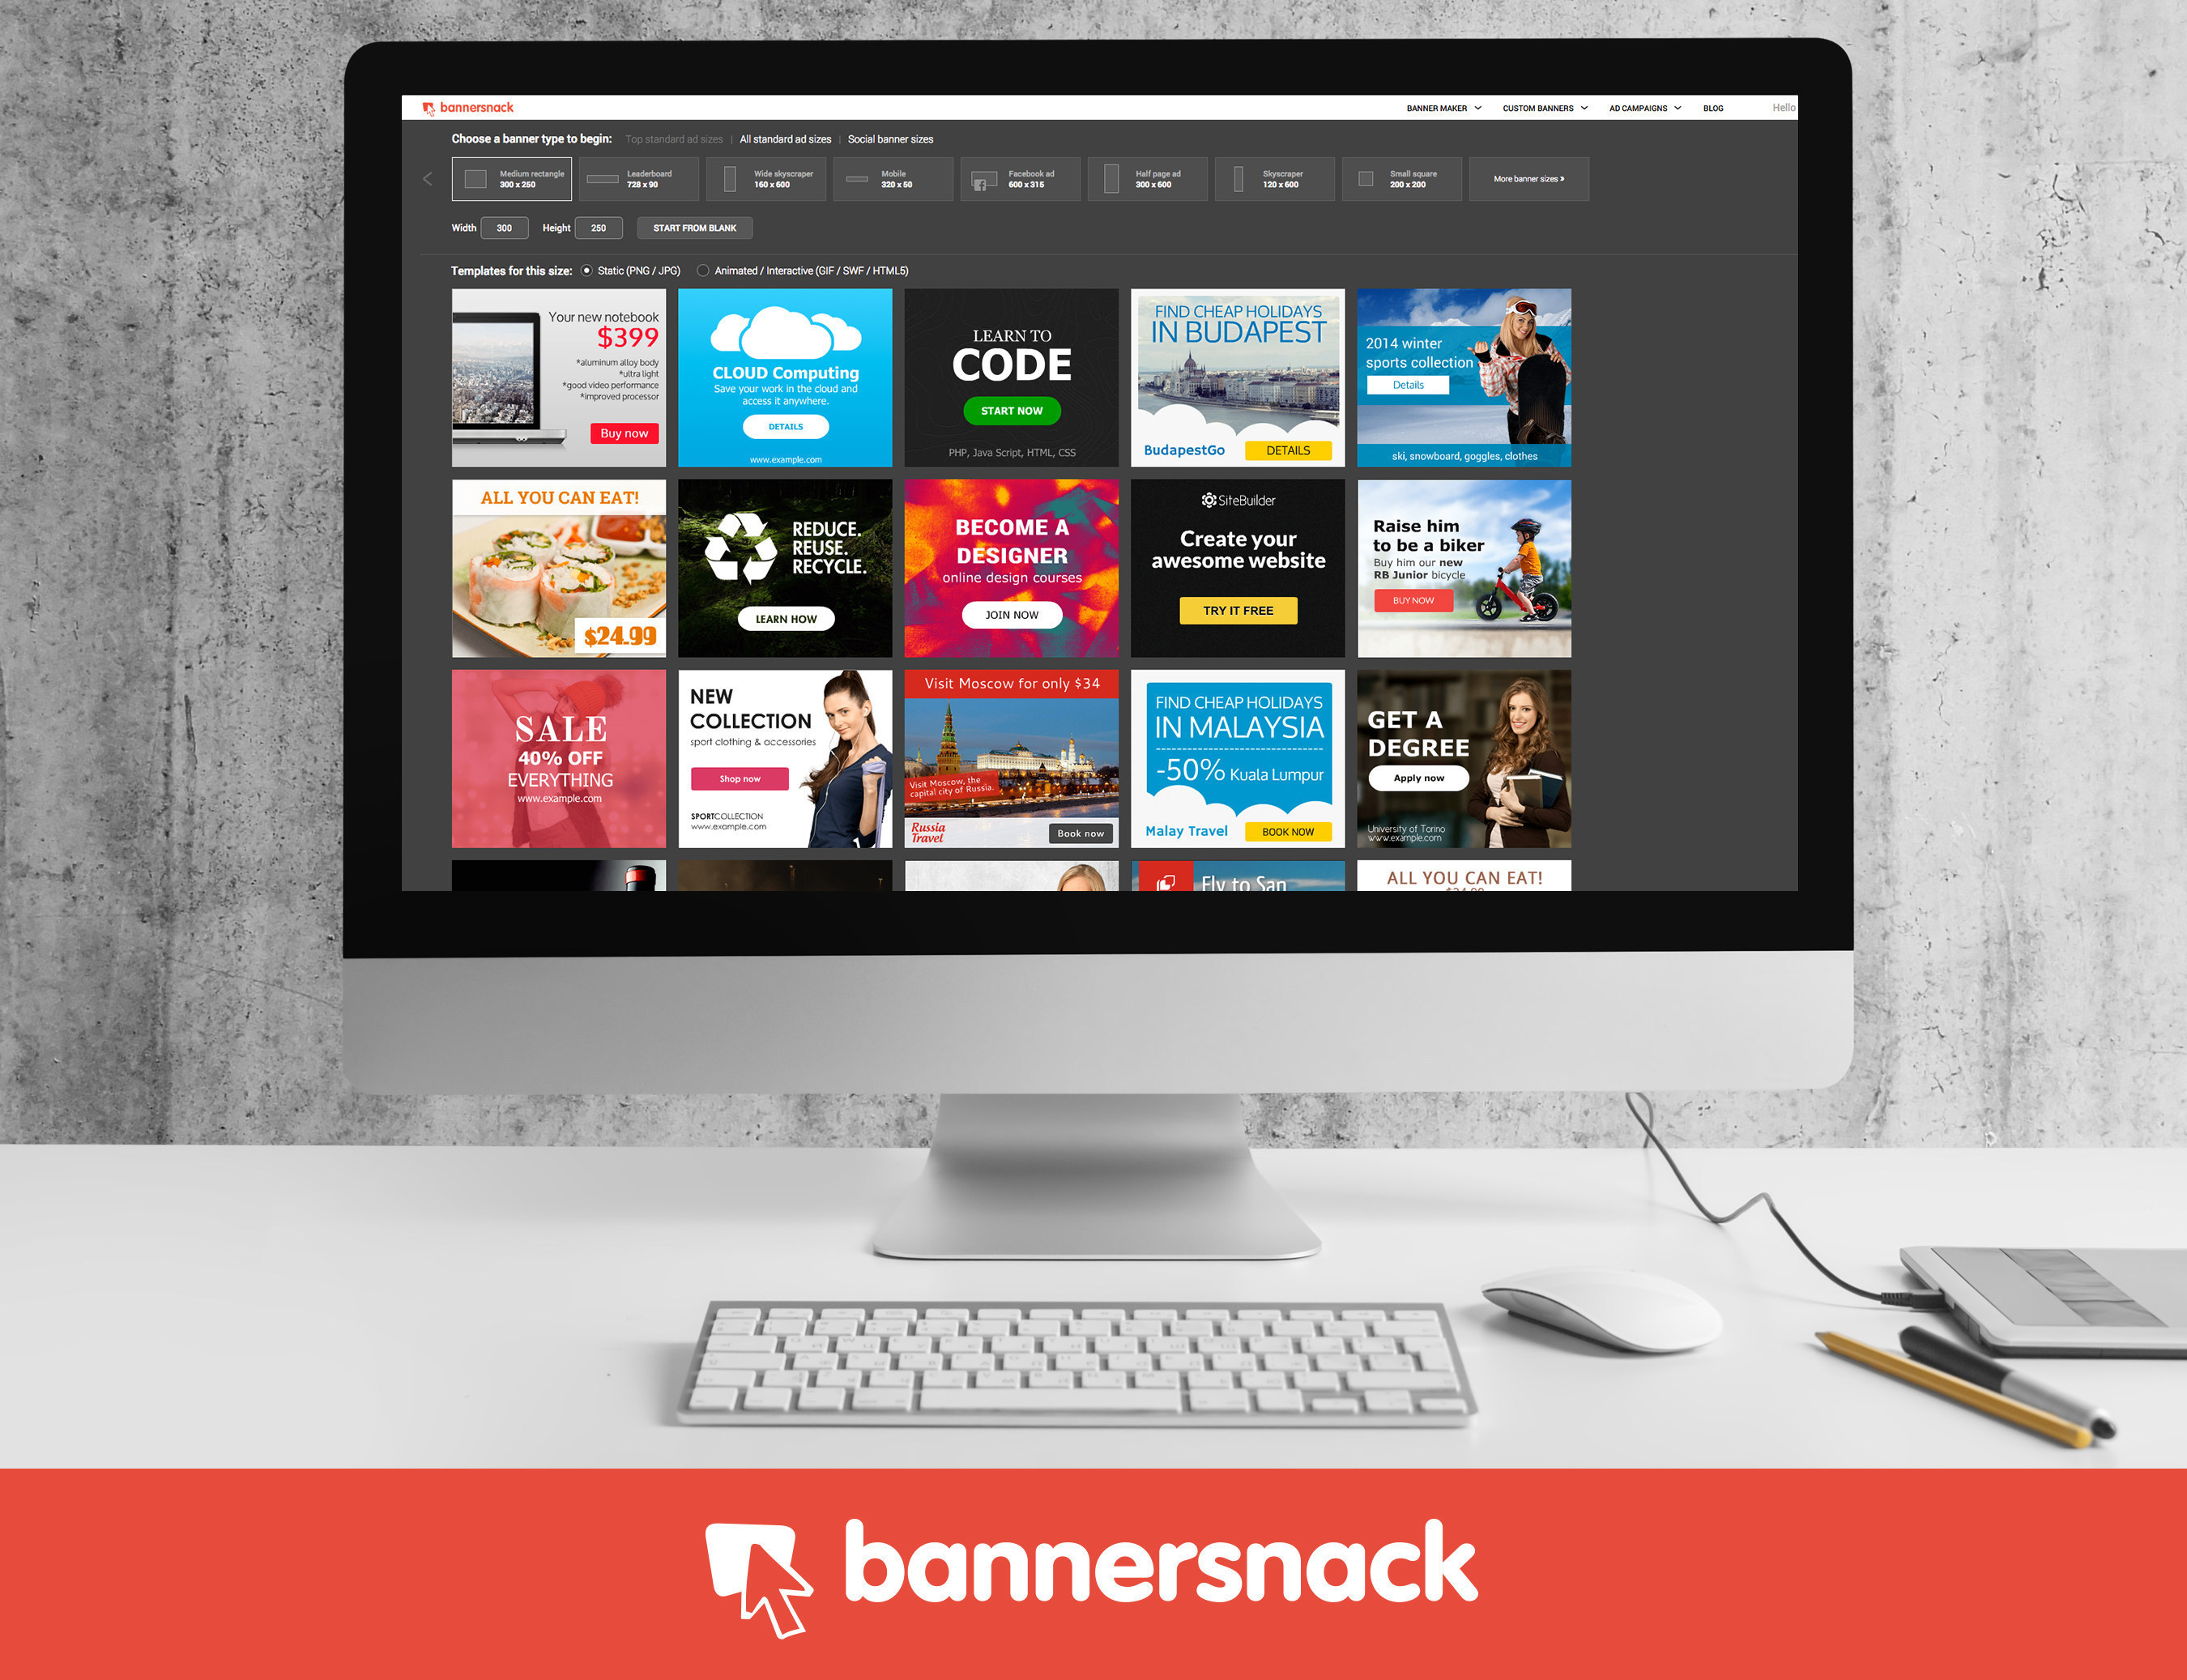 Free banner maker cloud app for advertising agencies, from Bannersnack